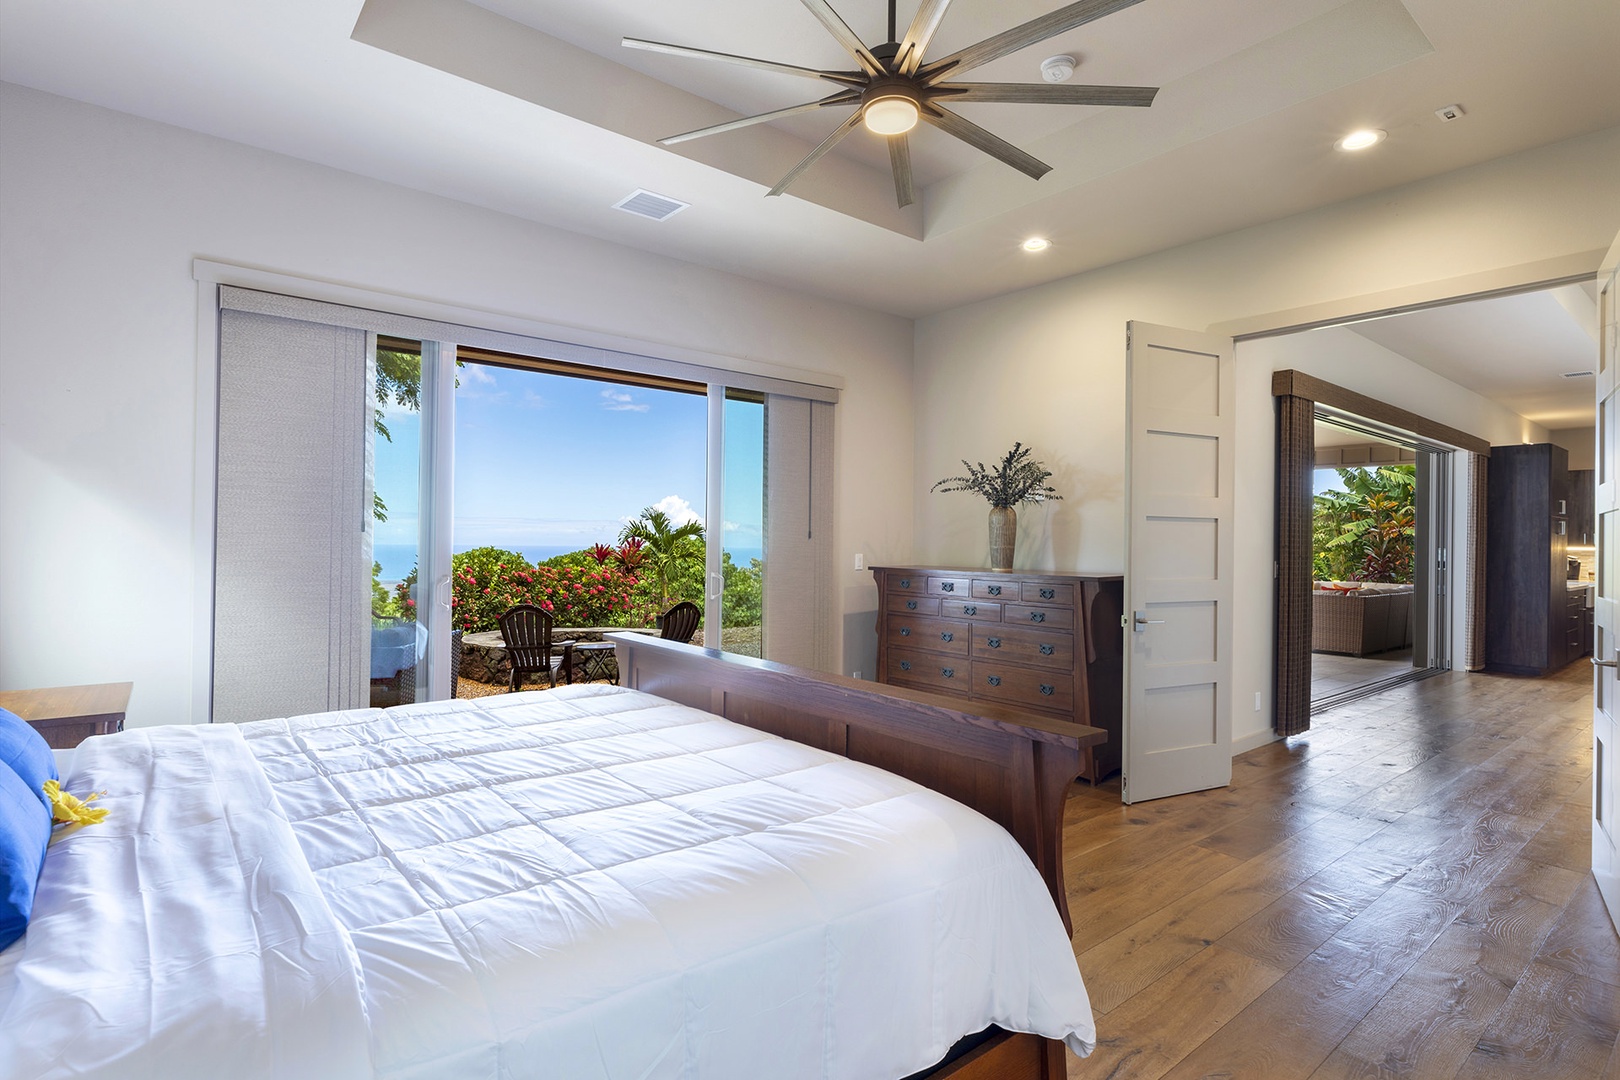 Master bedroom with lanai access and private ensuite